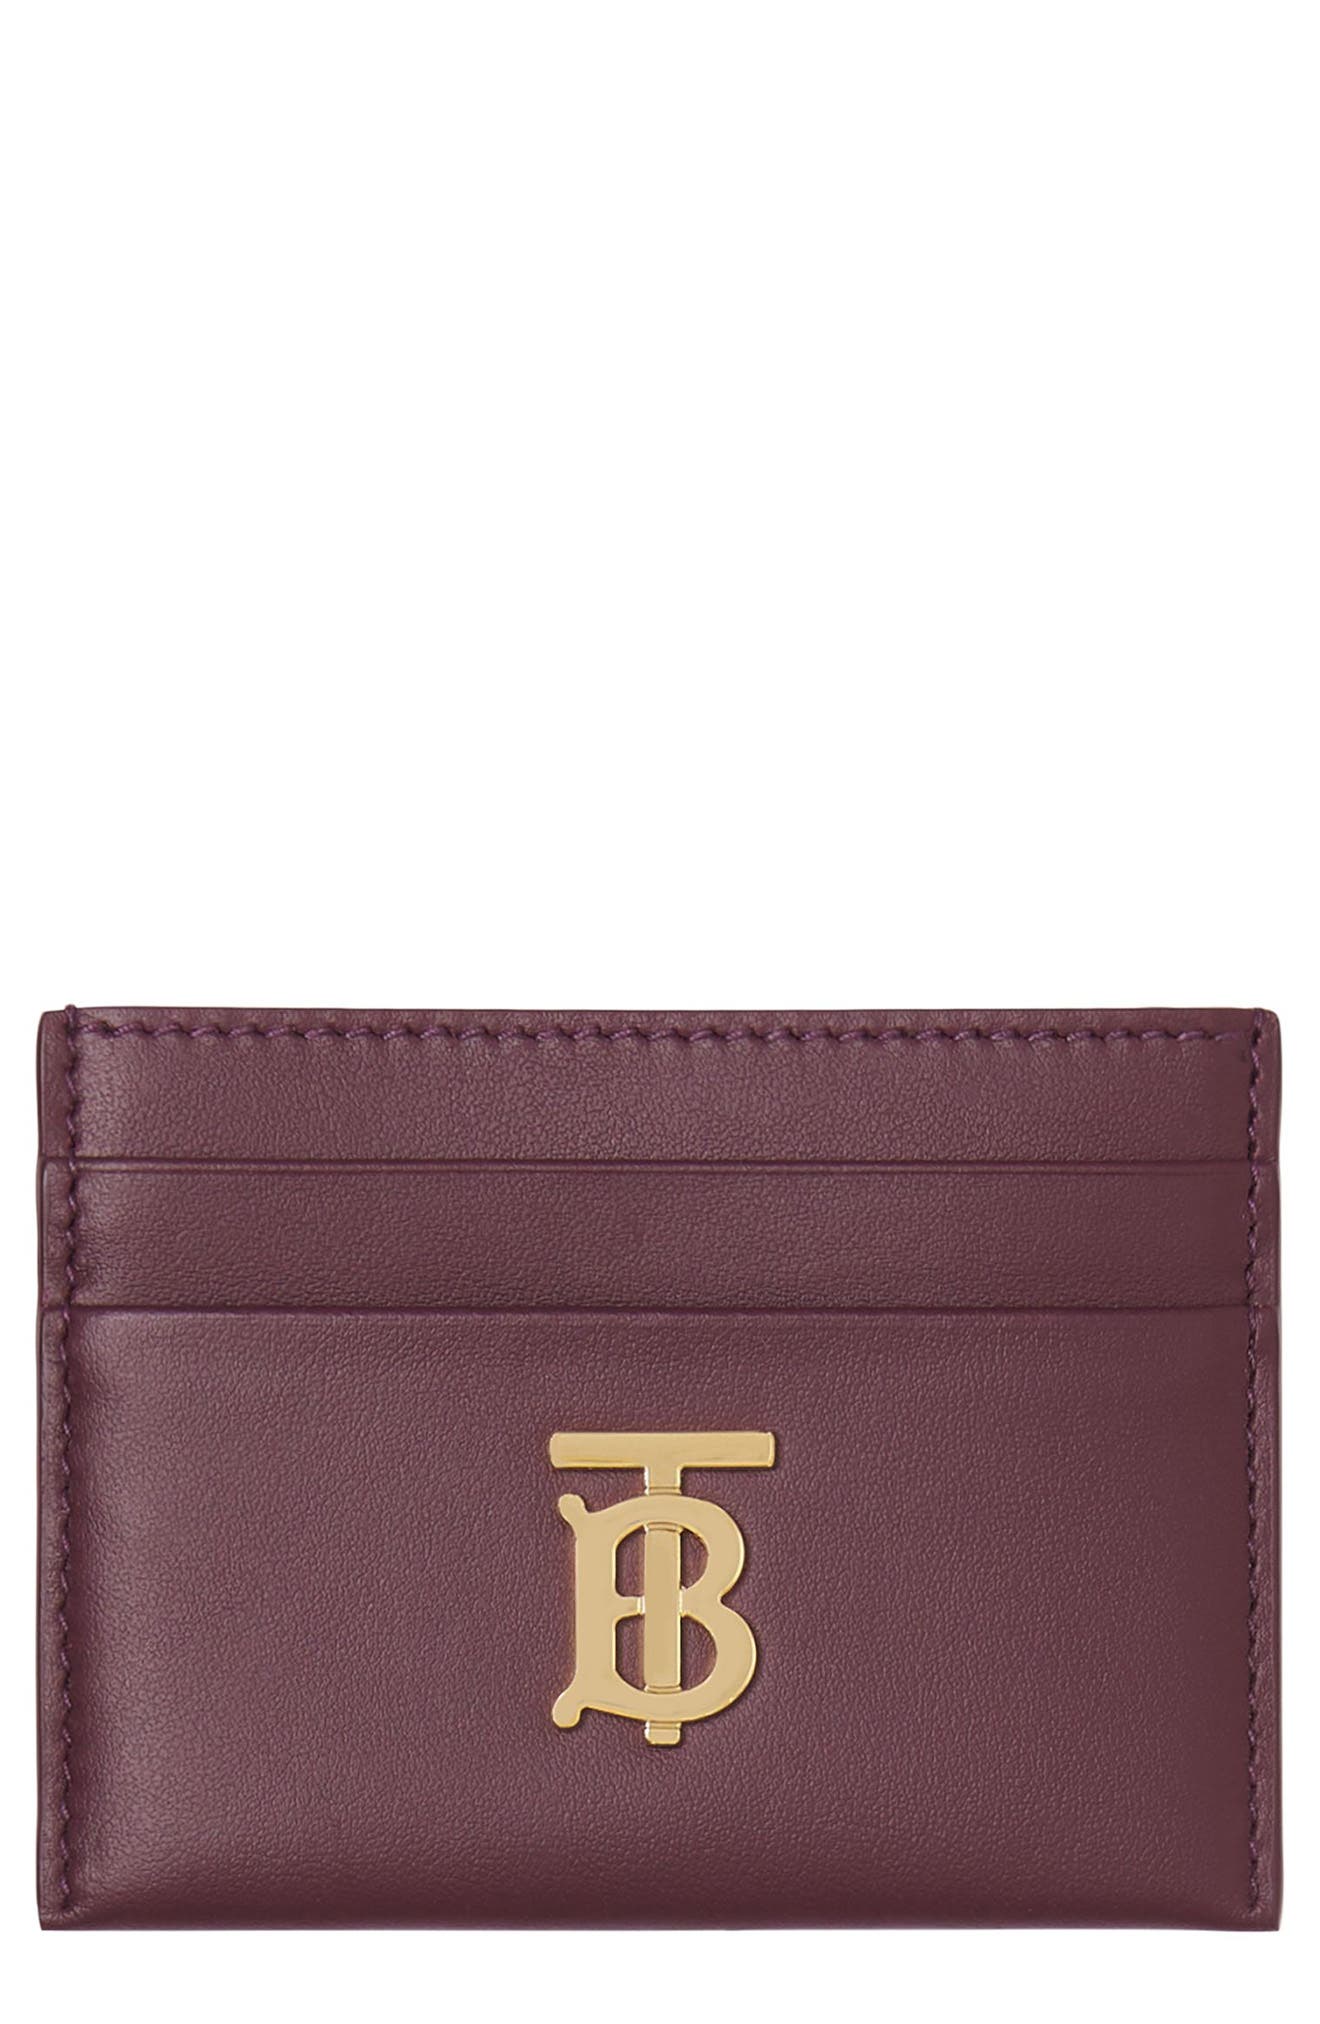 Burberry Sandon TB Monogram Leather Card Case in Deep Maroon at Nordstrom